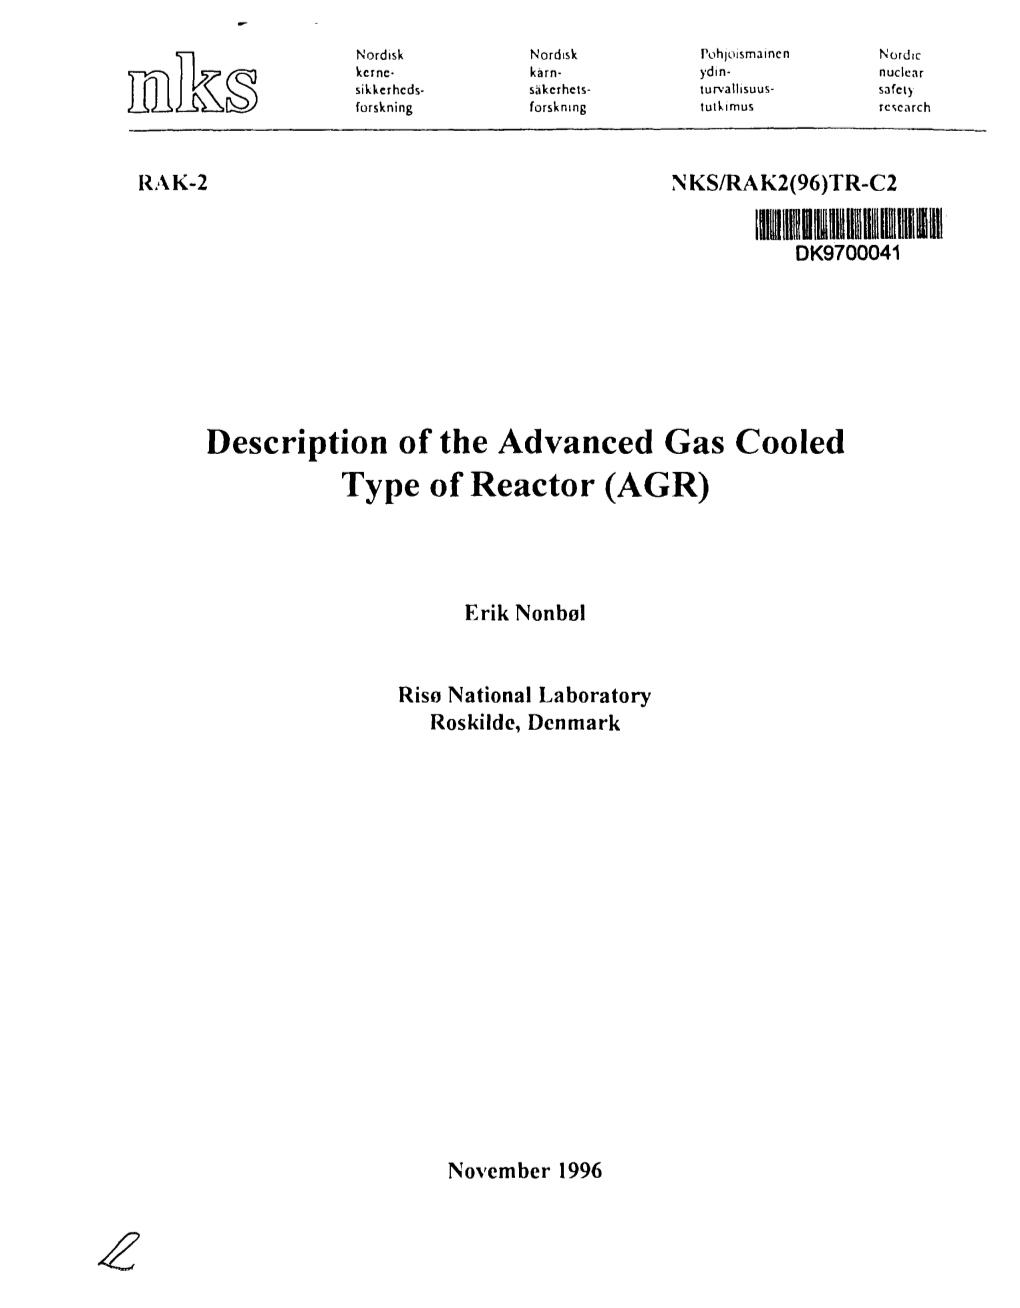 Description of the Advanced Gas Cooled Type of Reactor (AGR)